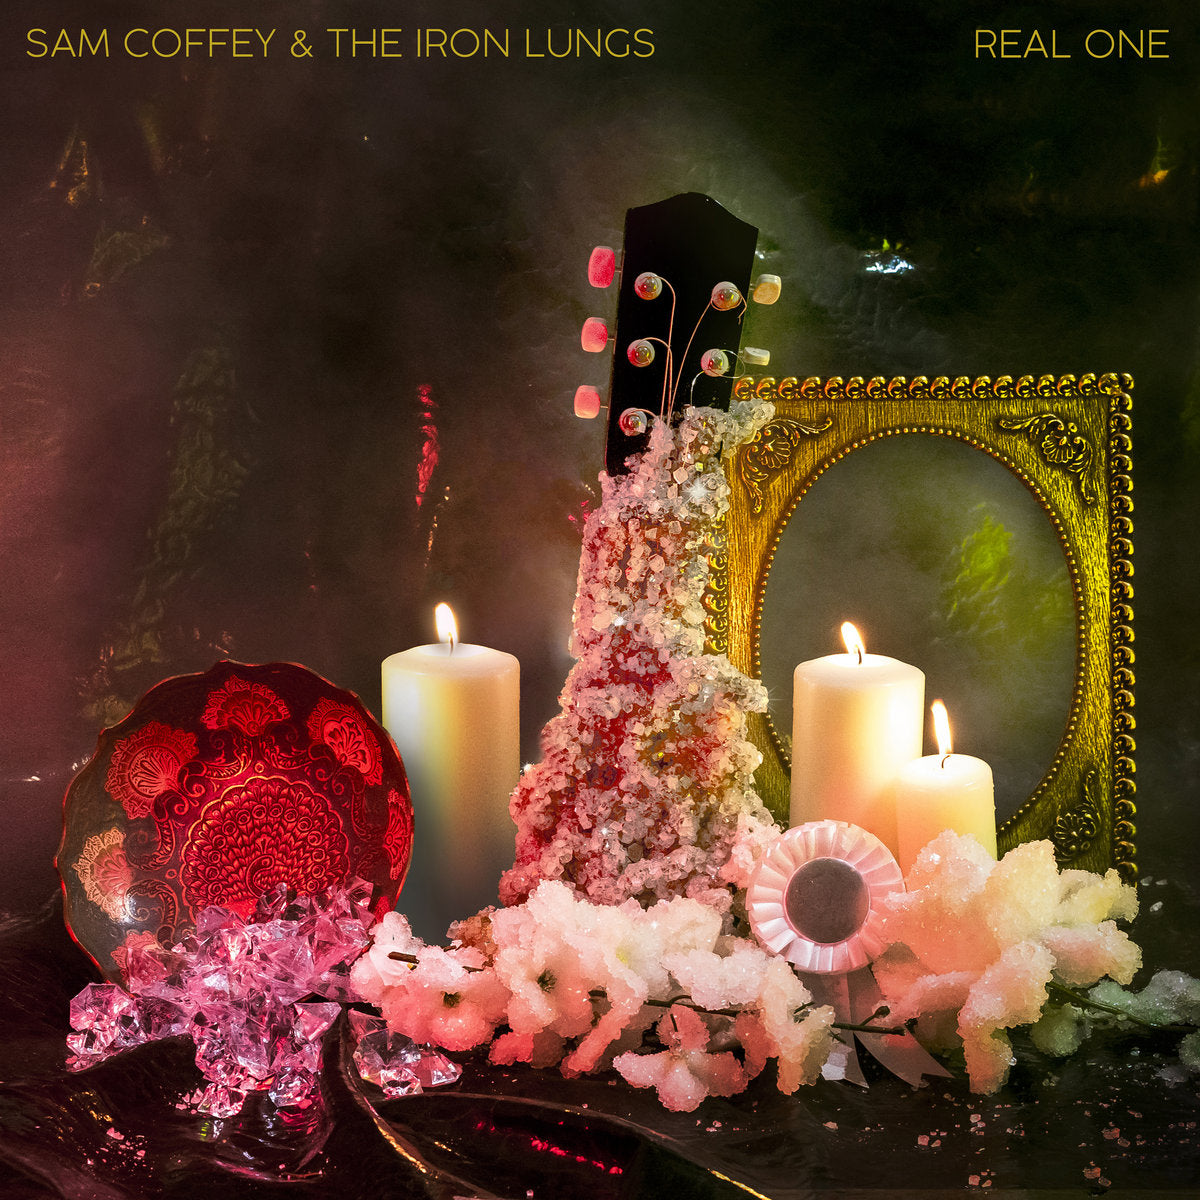 Sam Coffey &  The Iron Lungs - Real One (Vinyl LP)